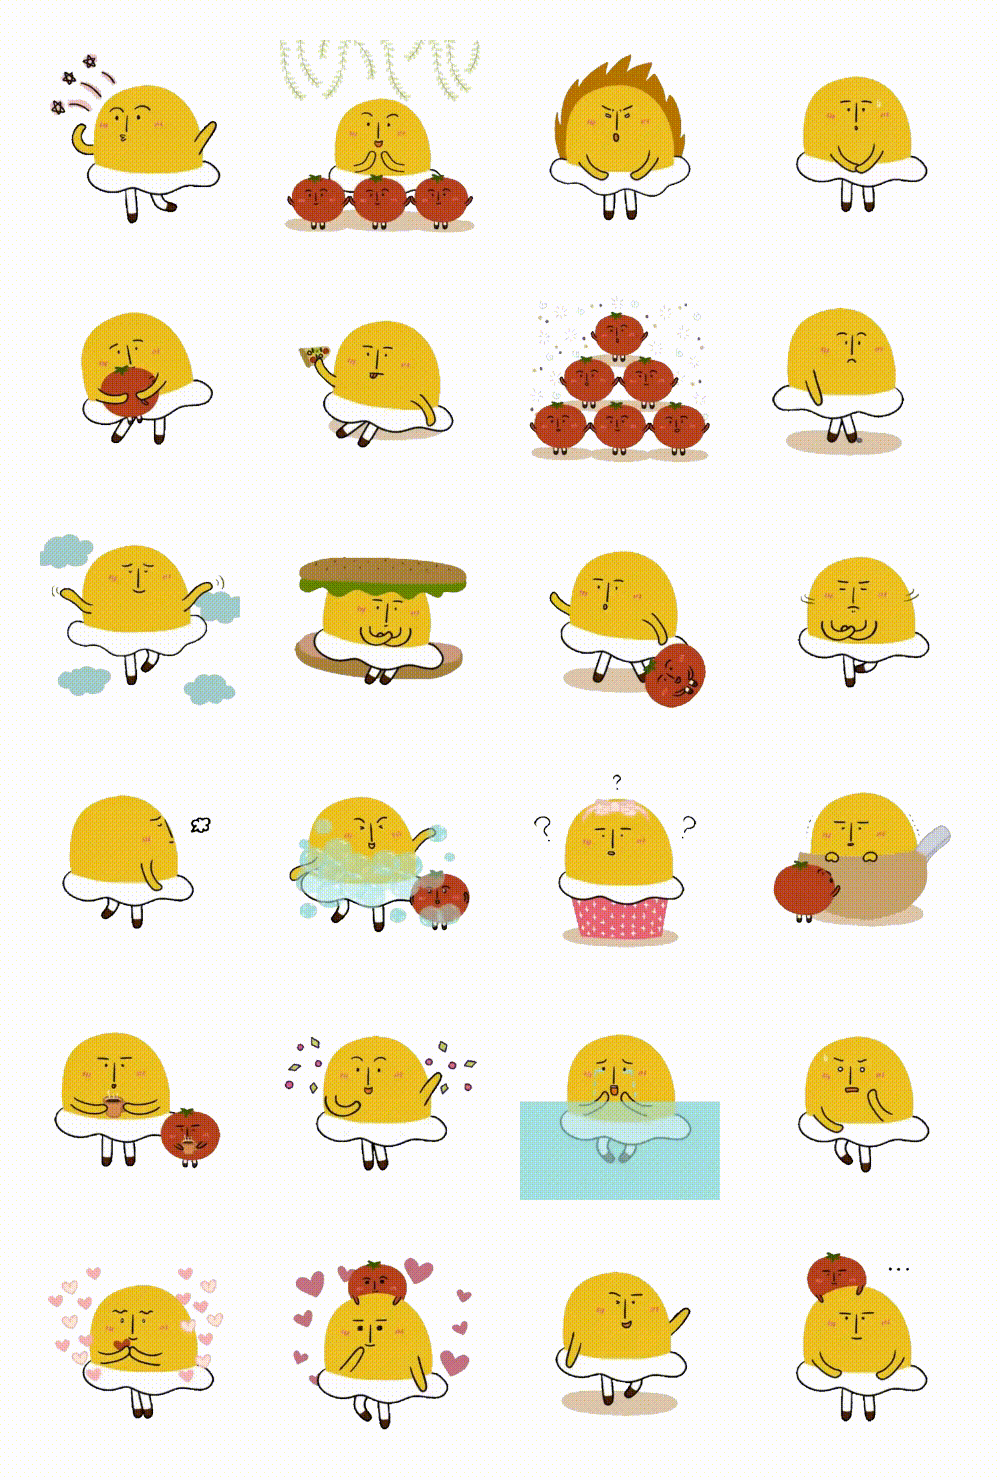 egg&chup Animation/Cartoon sticker pack for Whatsapp, Telegram, Signal, and others chatting and message apps